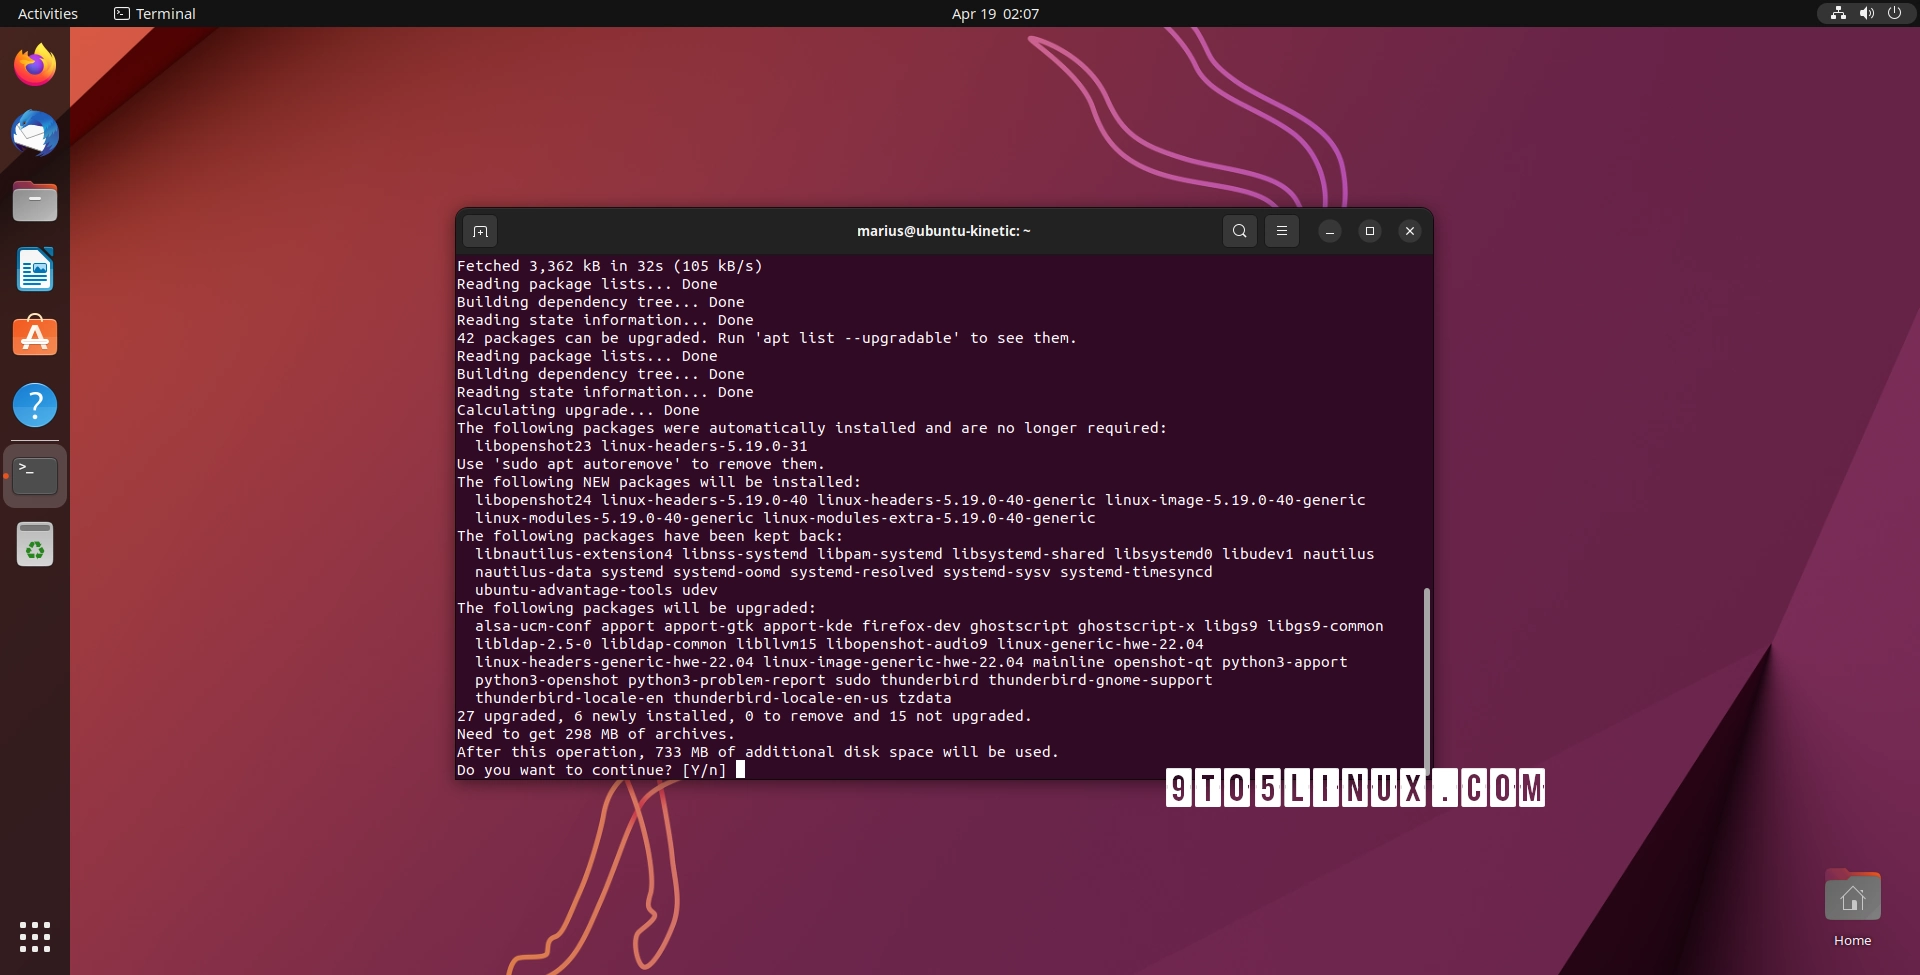 Ubuntu Users Get New Linux Kernel Updates, 17 Security Vulnerabilities Patched